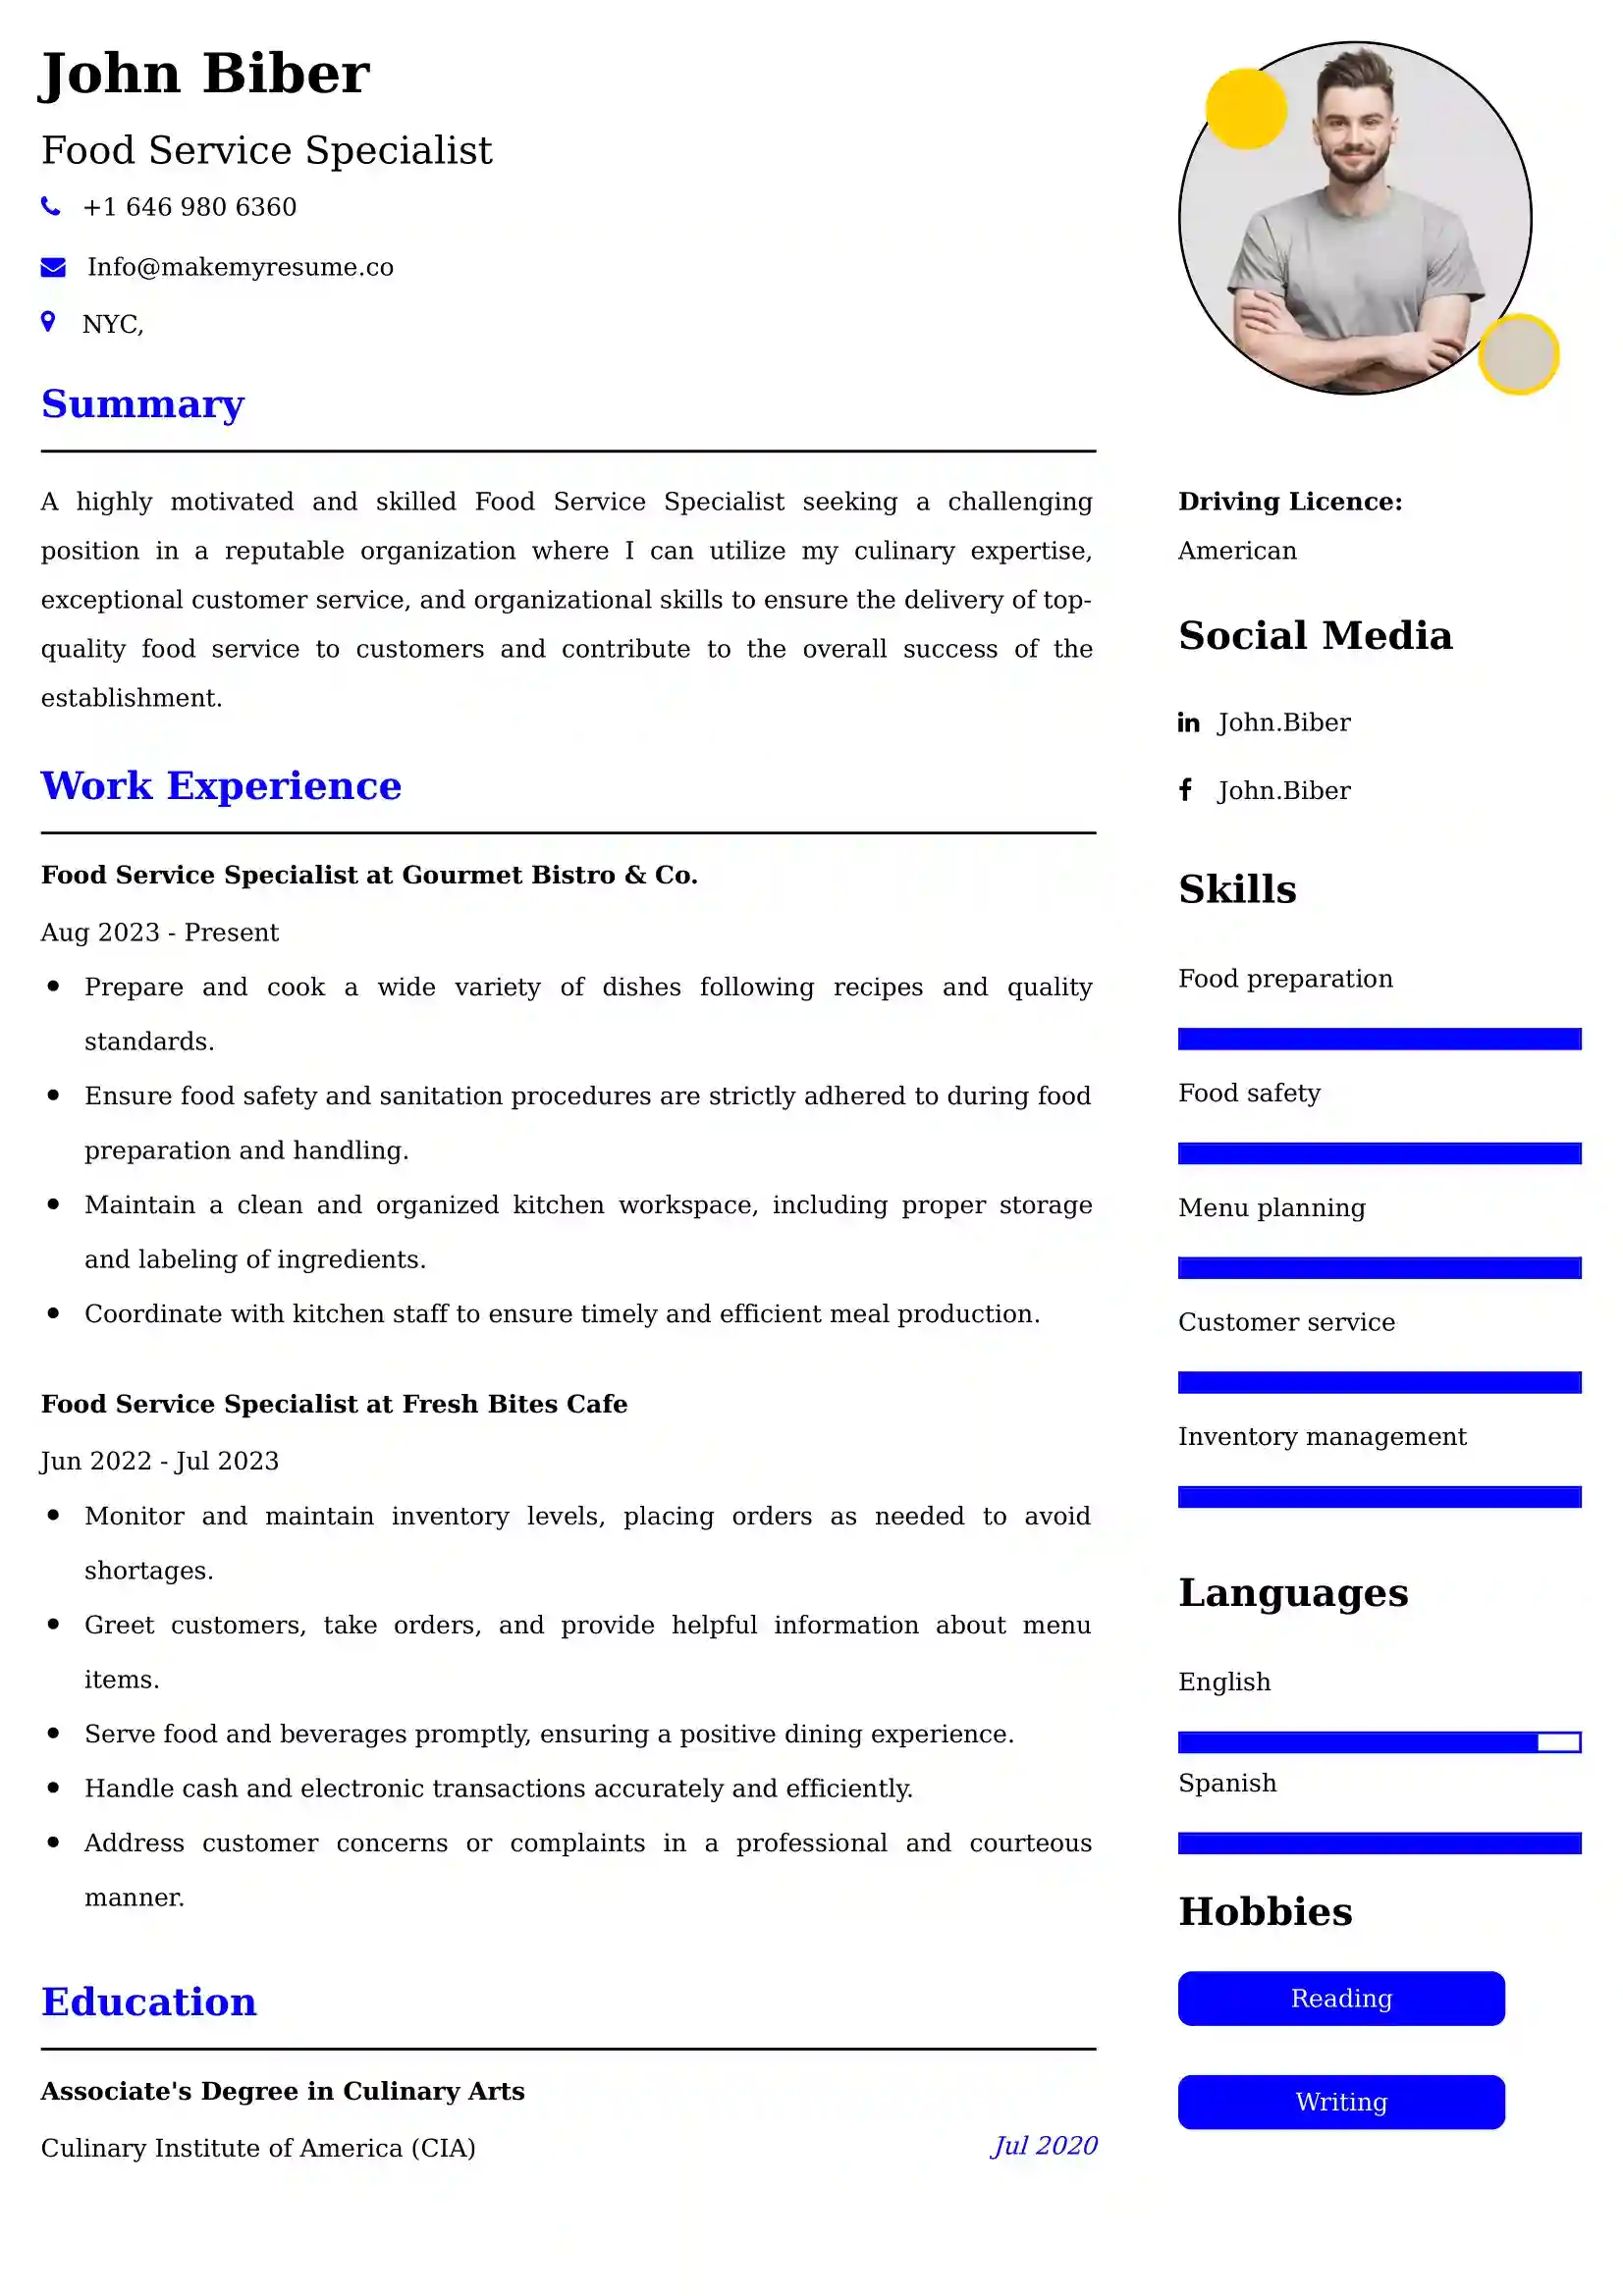 Best Food Service Specialist Resume Examples for UAE